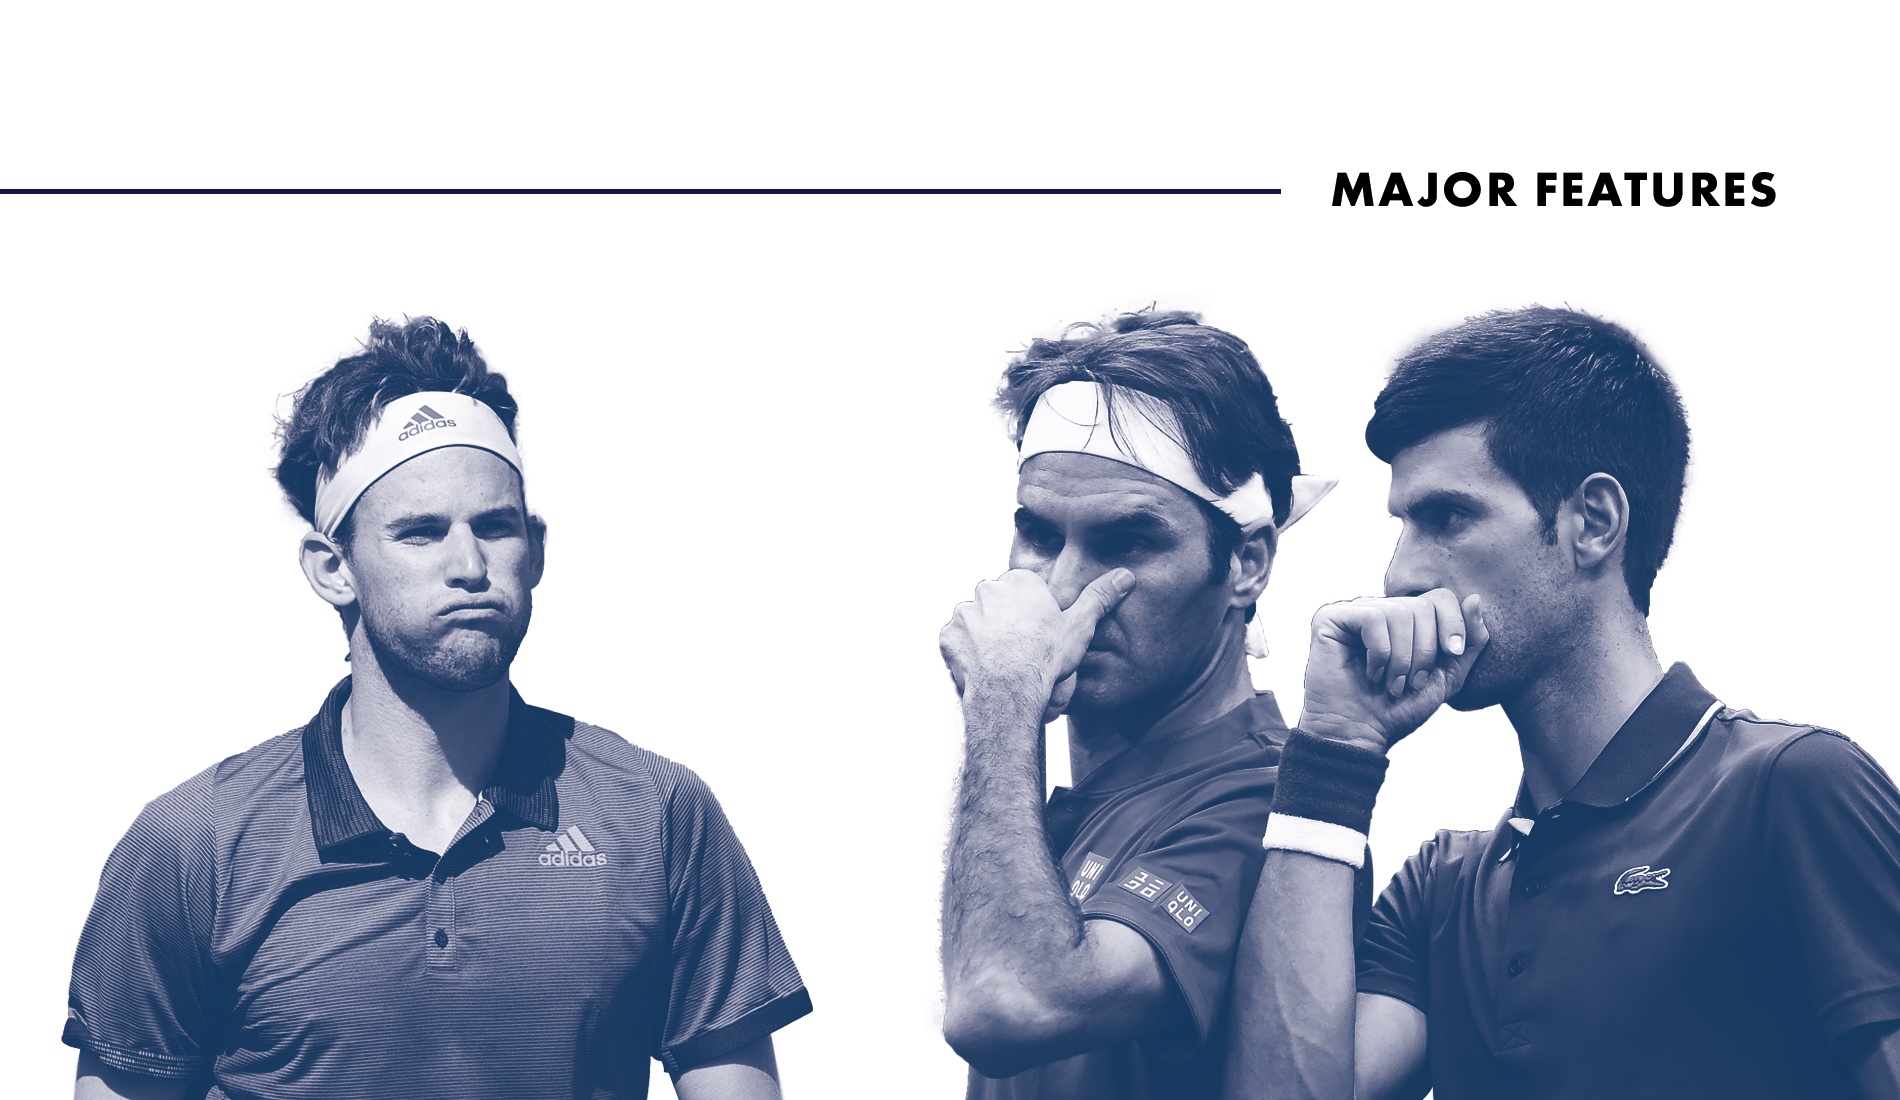 Dominic Thiem, Roger Federer, Novak Djokovic, for the Tennis Majors feature about player relief funds